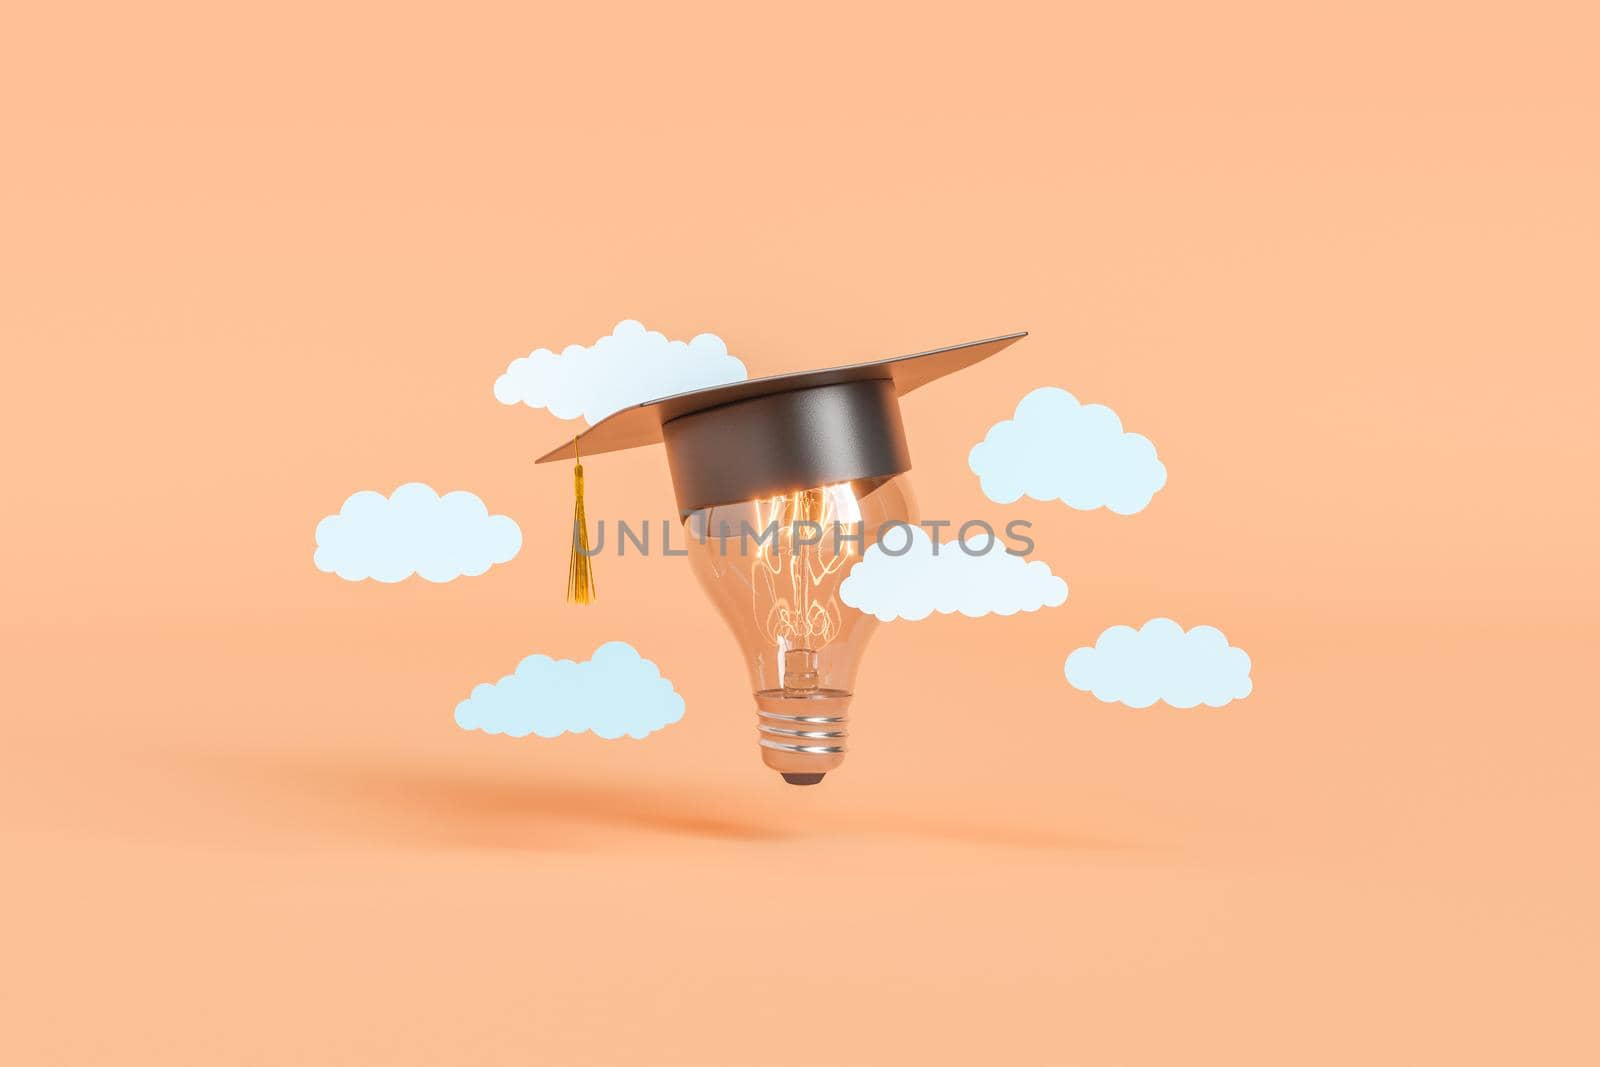 Glowing lightbulb in graduation cap among clouds by asolano